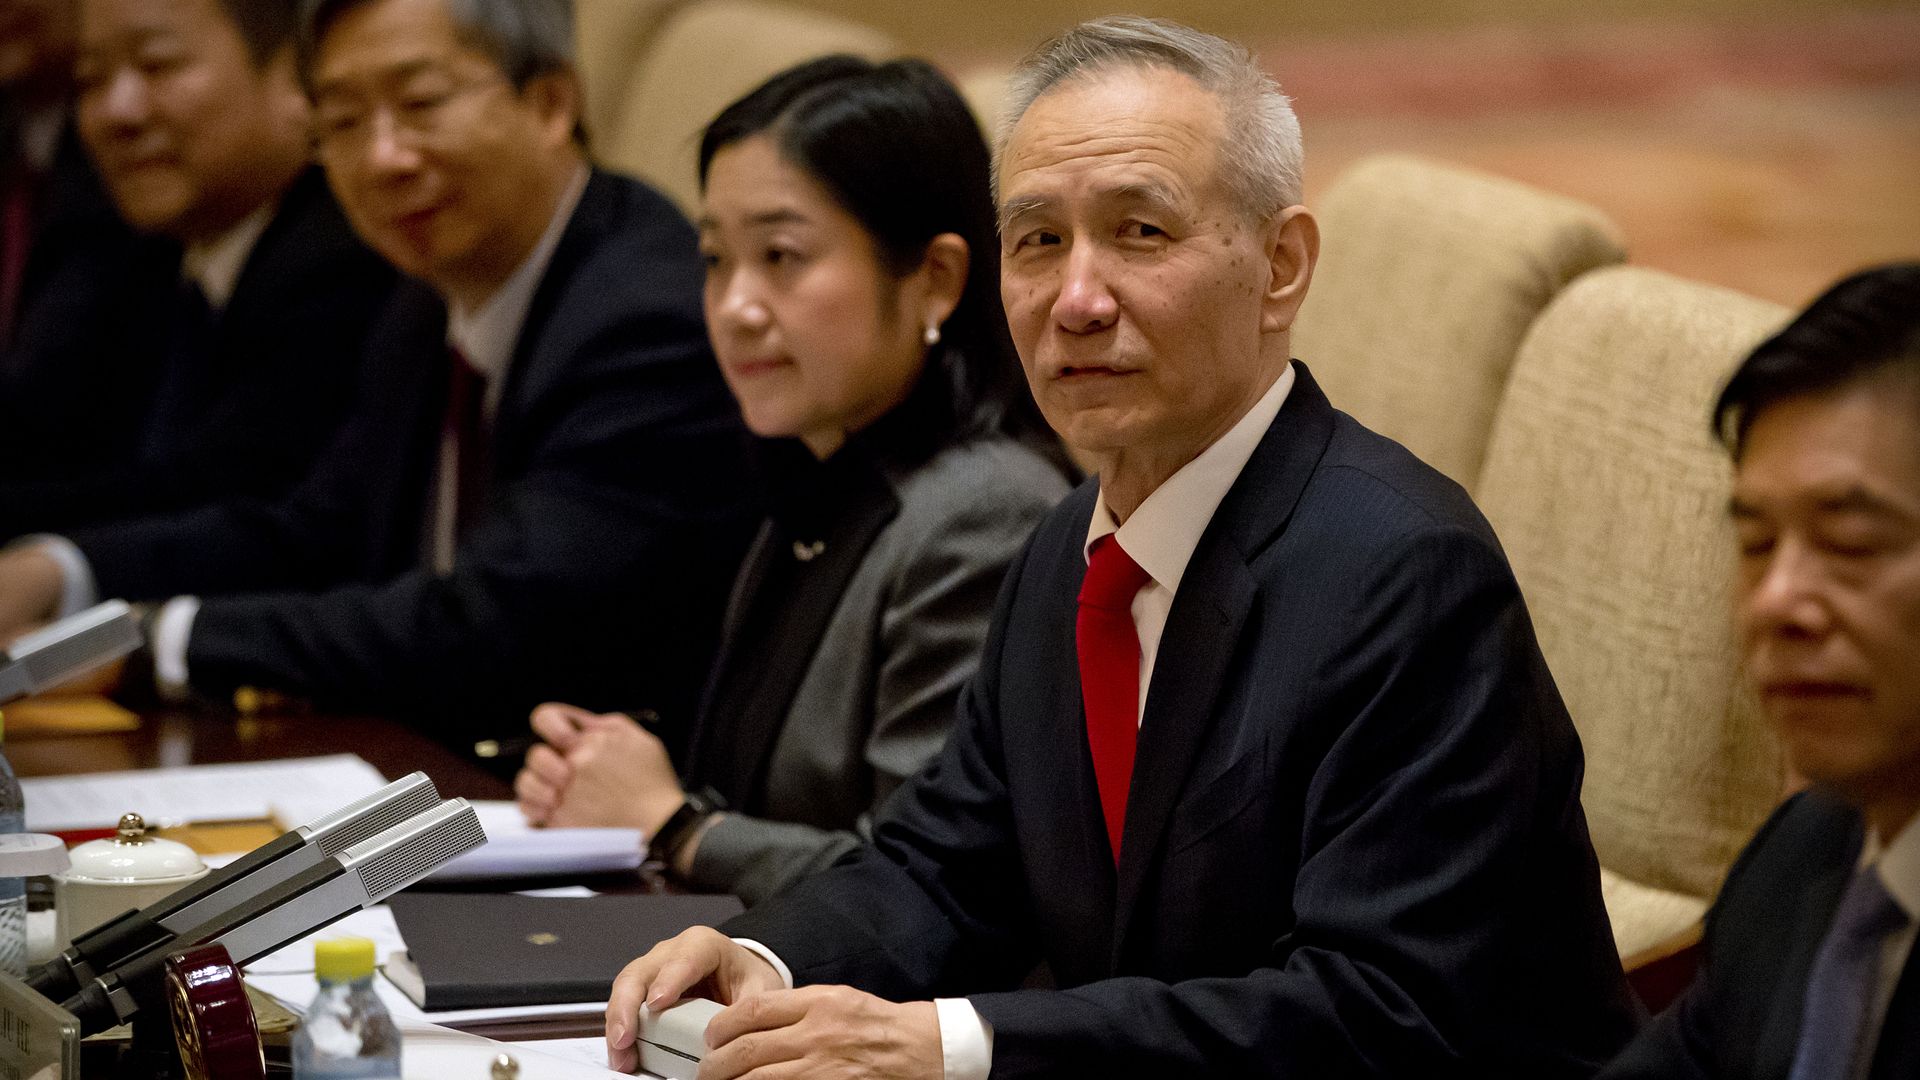 In this image, Vice Premier Liu He sits at a conference table in a beige chair next to other professionally dressed men and women.